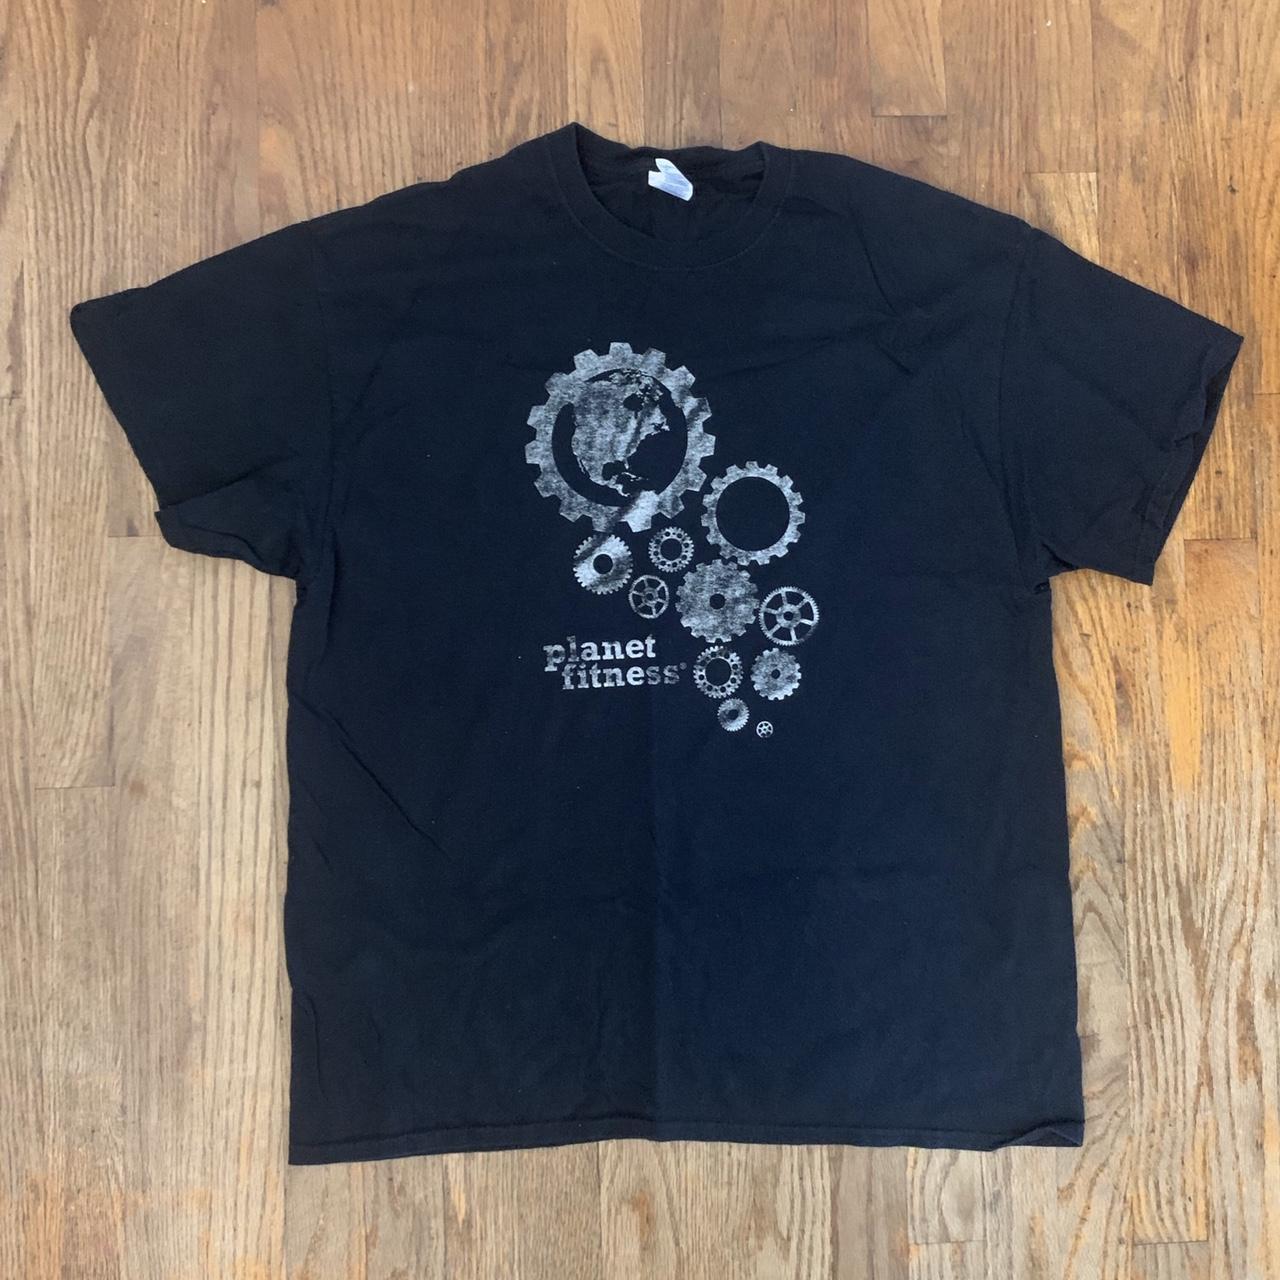 Vintage Planet fitness tee SIZE:XL Has no stains is - Depop